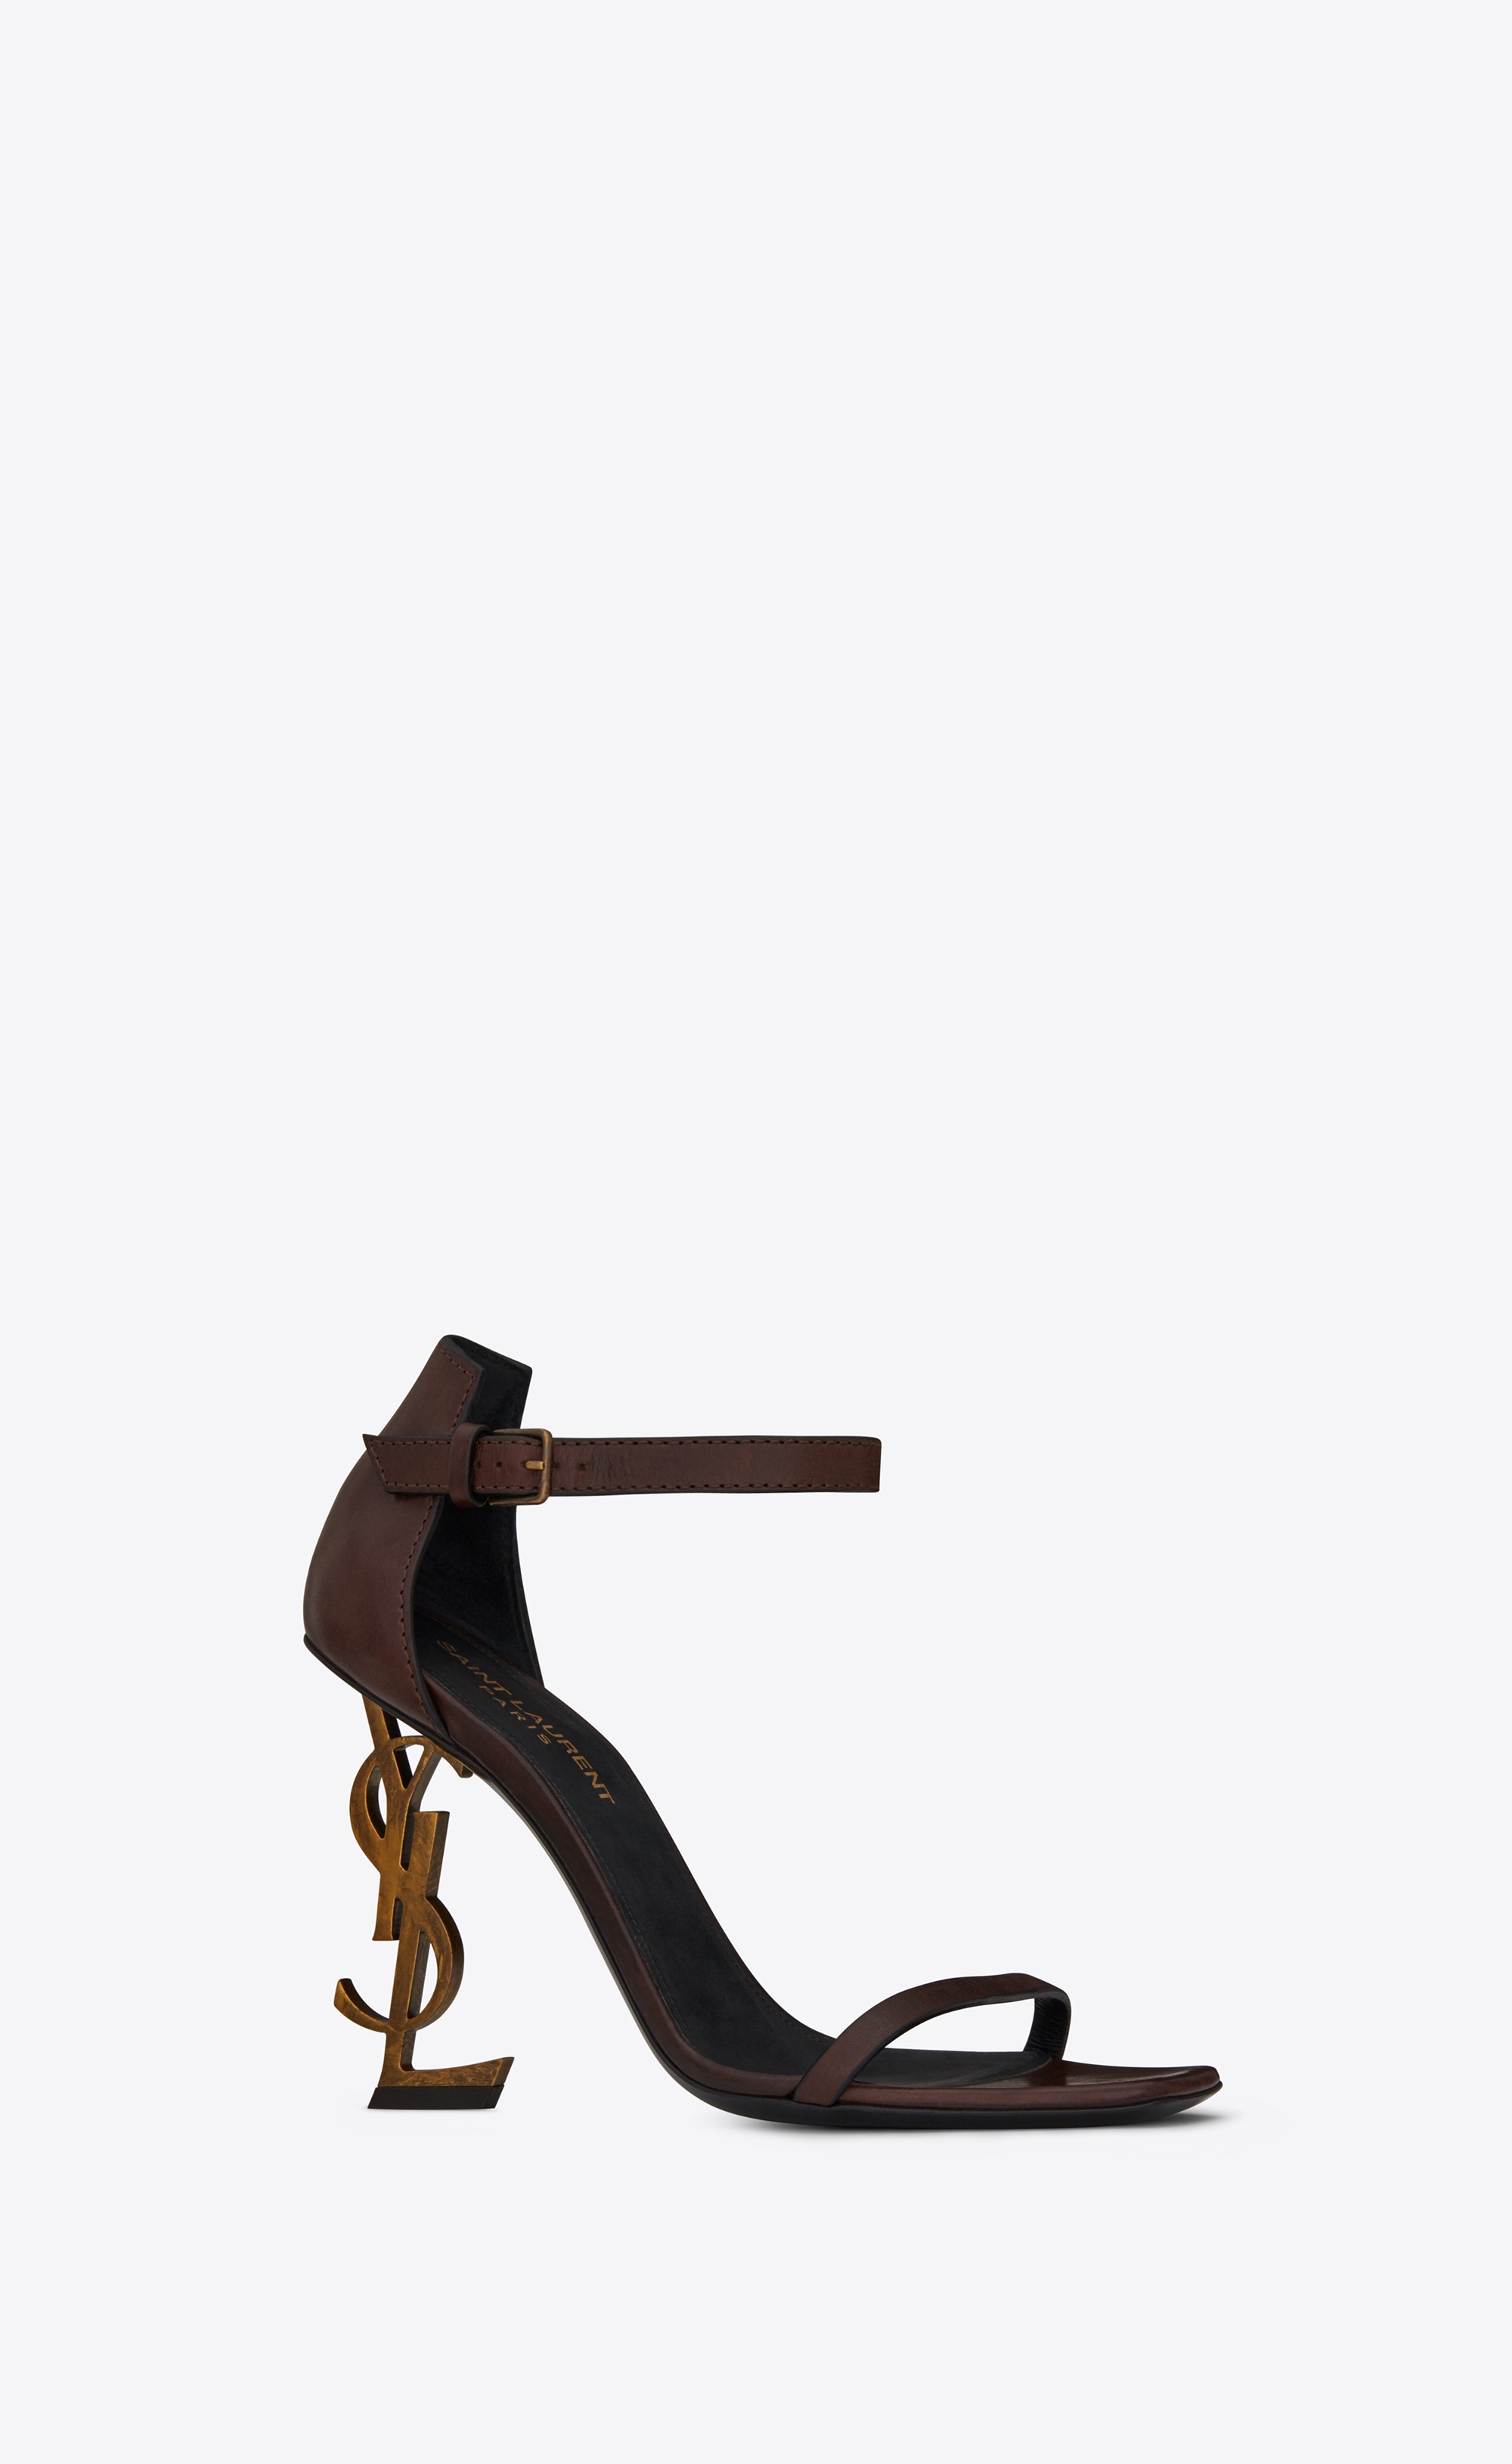 Saint Laurent ‎Opyum Sandals In Leather With Gold Toned Heel ‎ | YSL.com